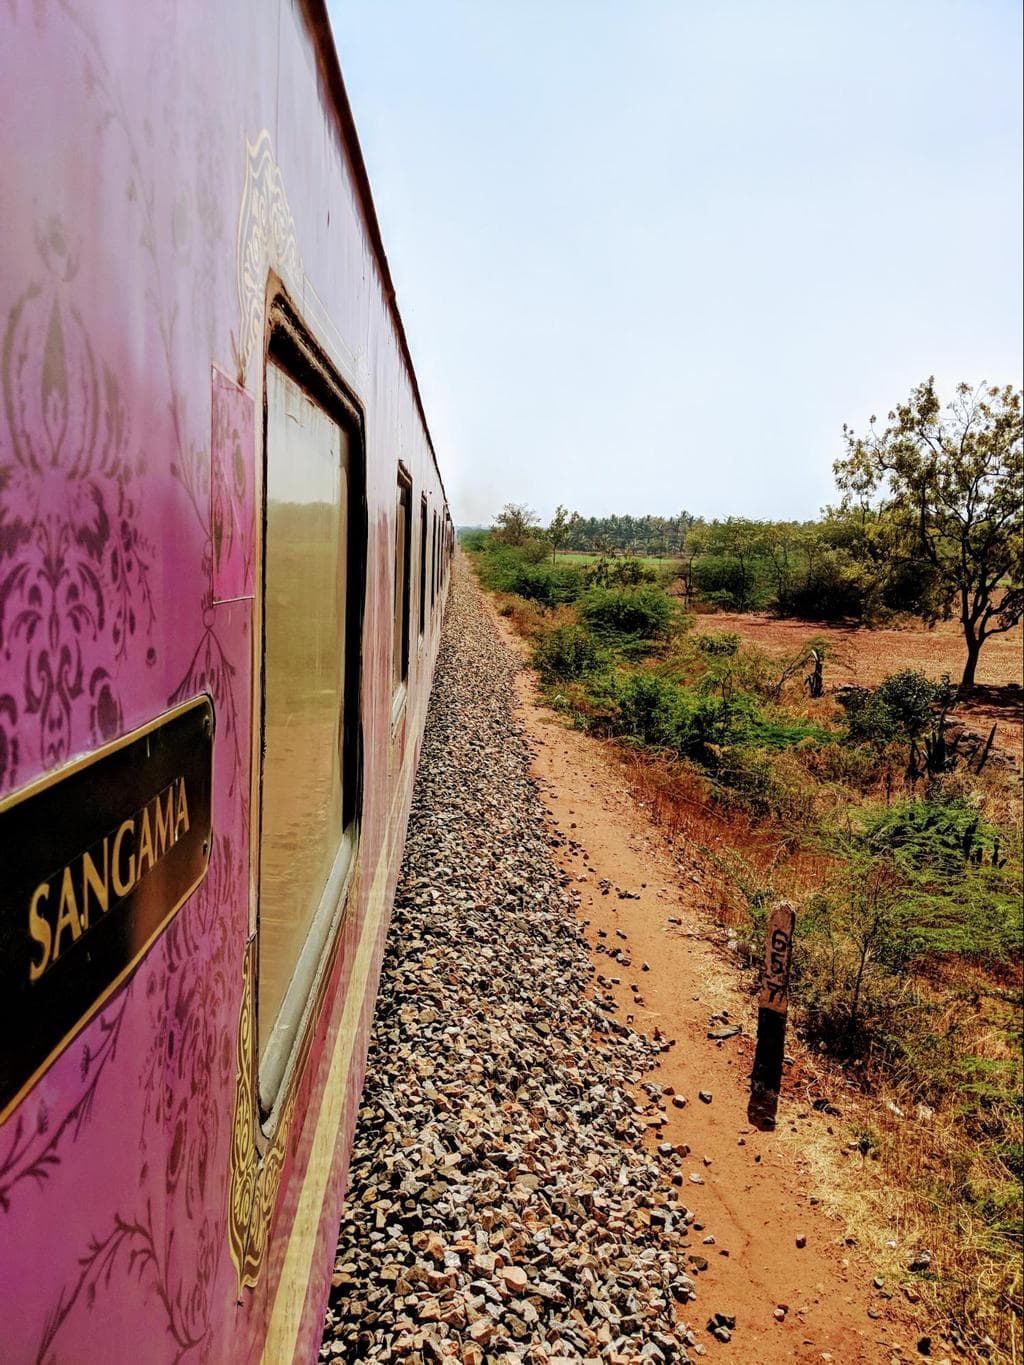 Golden Chariot Photo Gallery – Images of Luxury Train and Tour